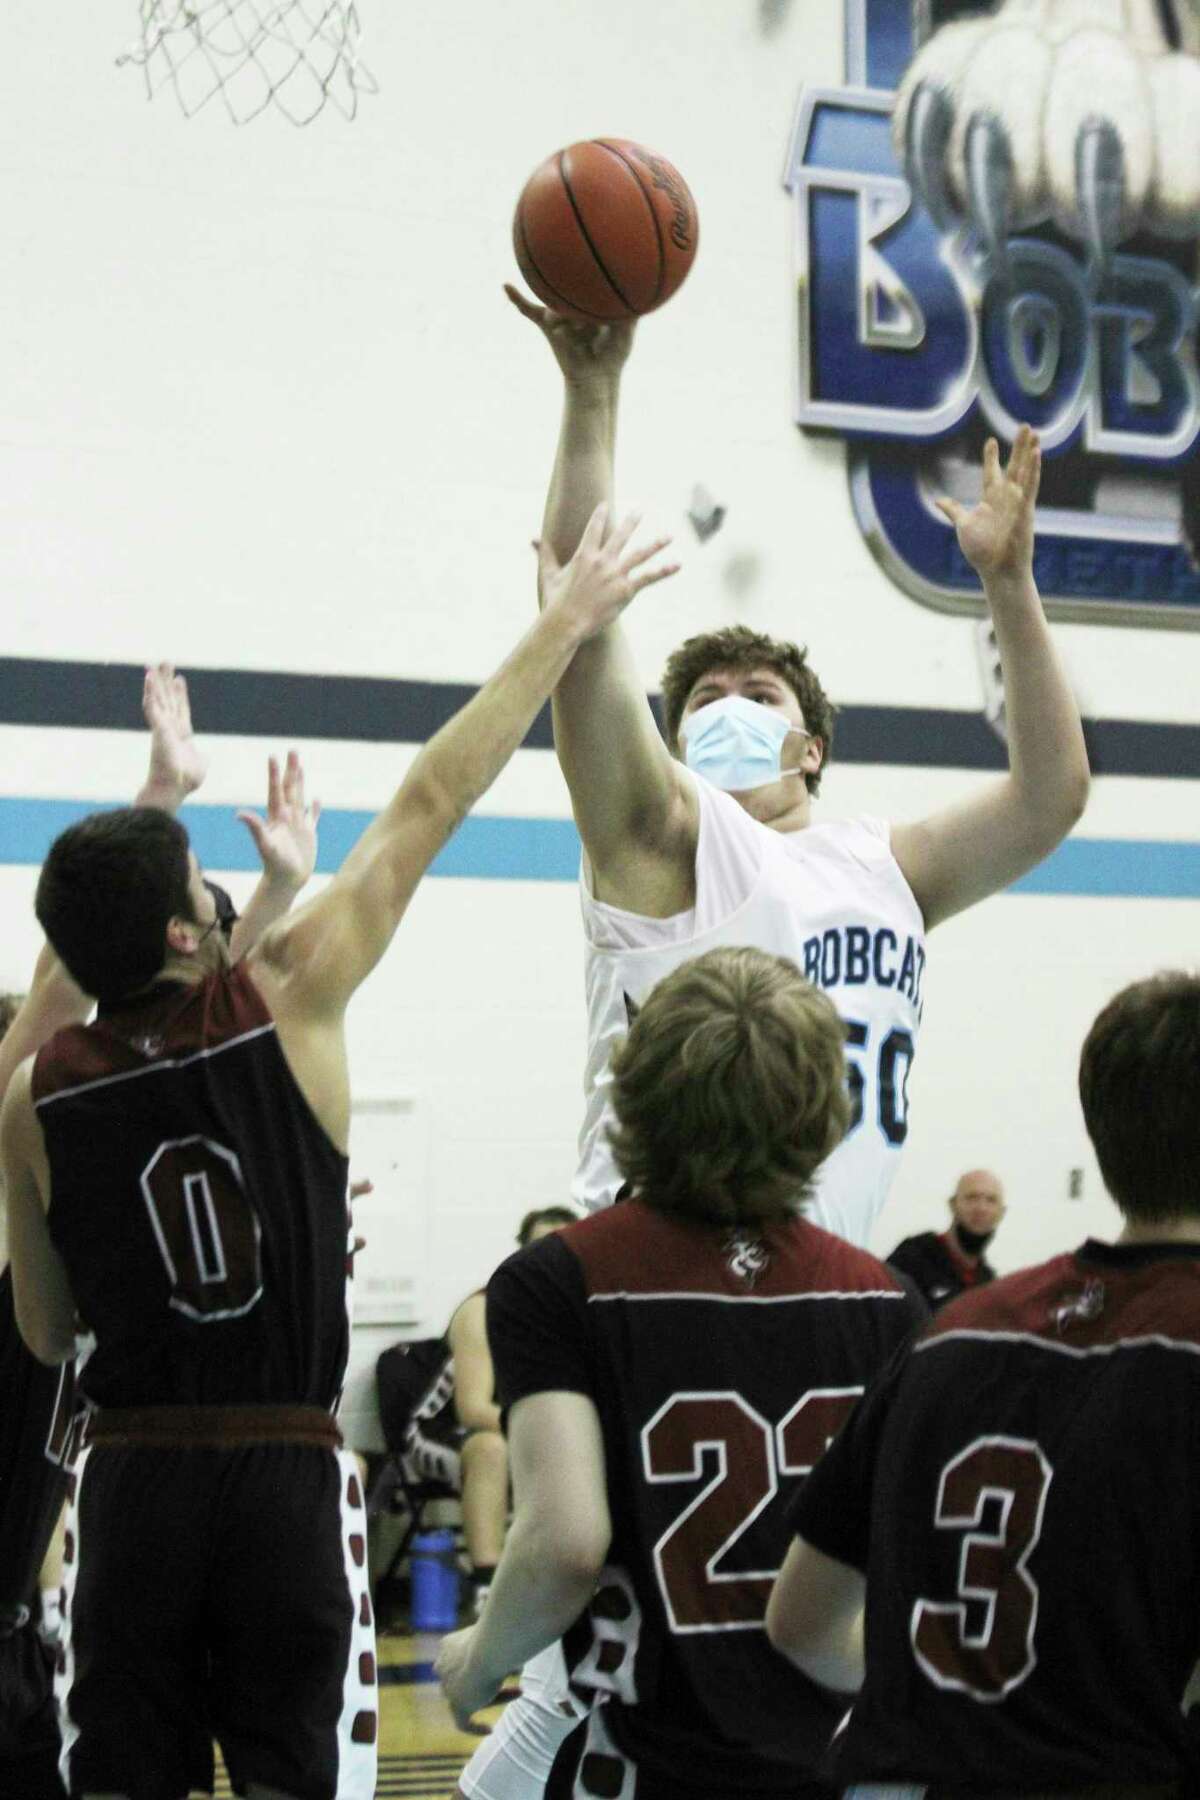 Brethren's Anthony Beccaria eyes the hoop during Monday's win over Traverse City Christian. (Dylan Savela/News Advocate)